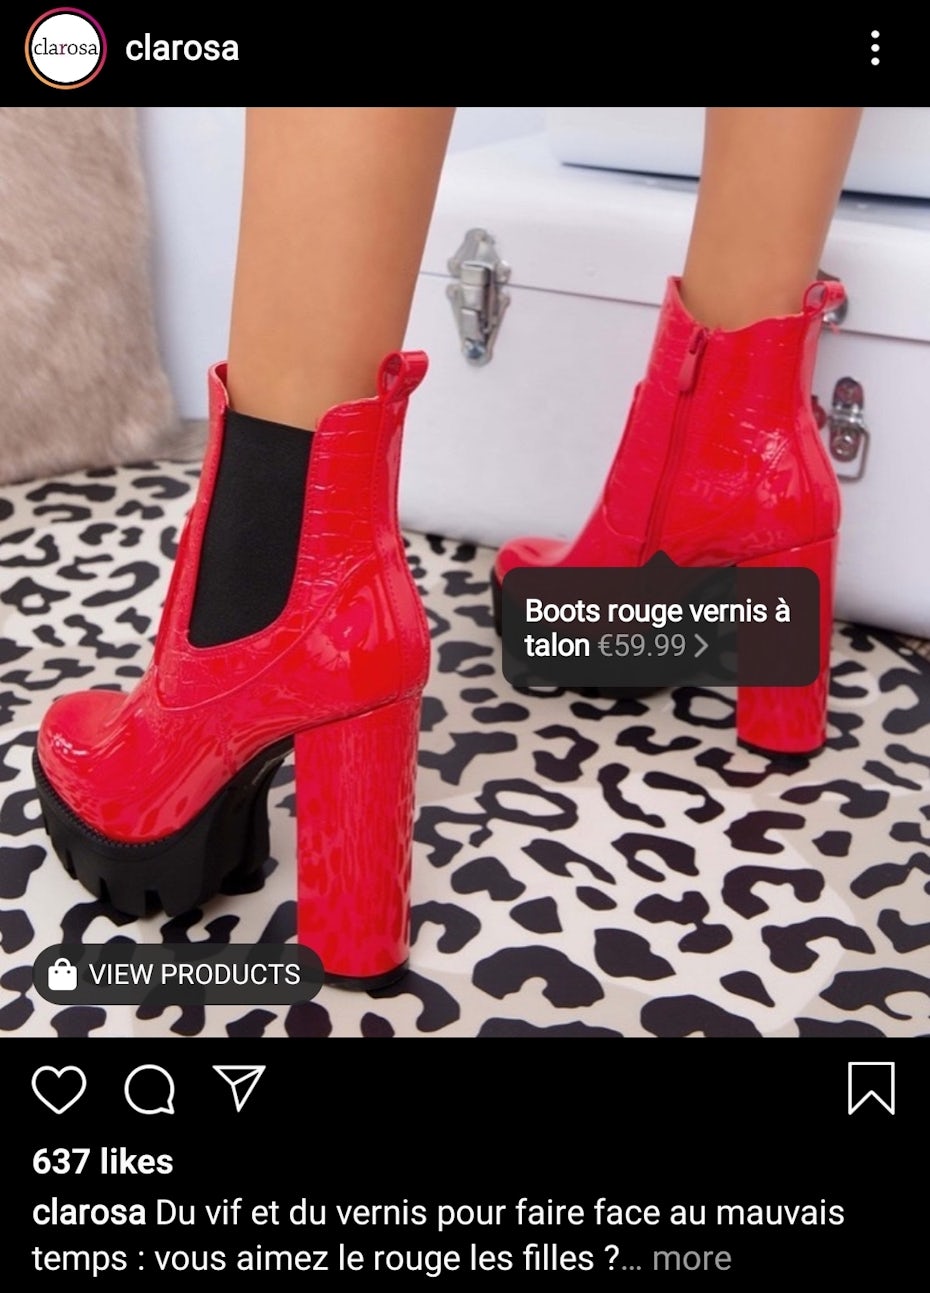  Digital marketing pattern 2020 example: Screenshot of a shoppable post on Instagram.